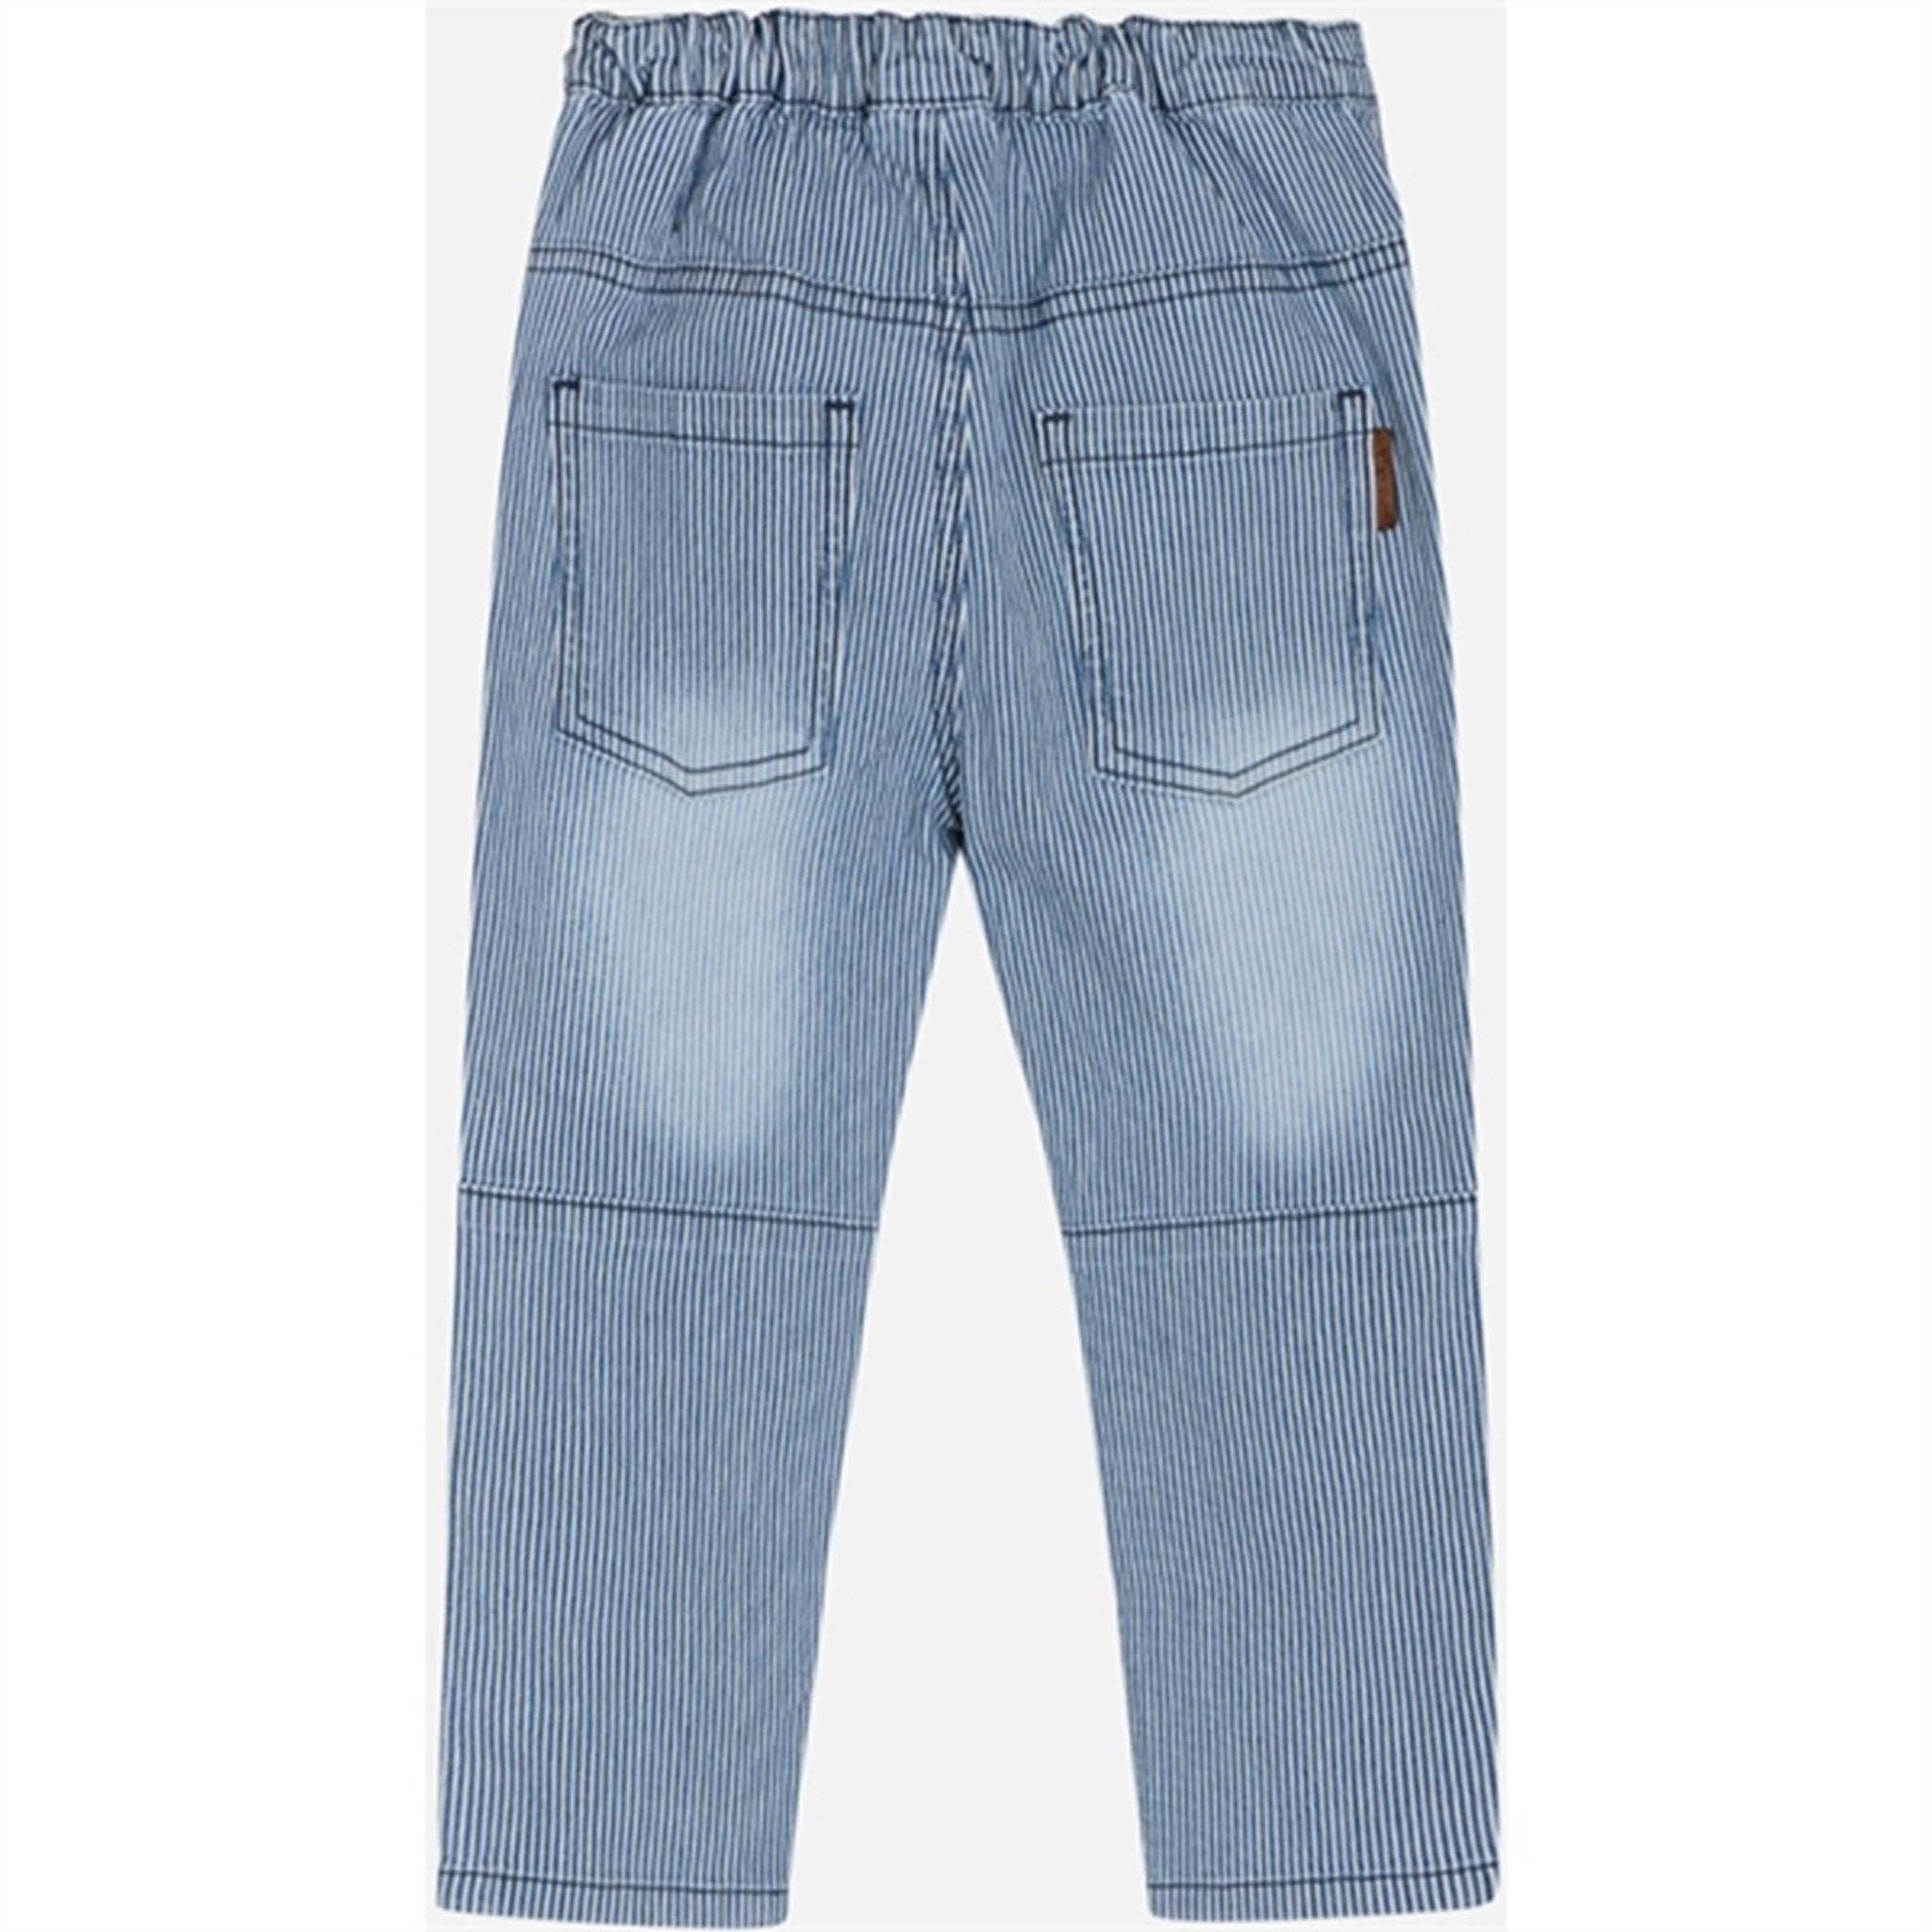 Hust & Claire Baby Stripes Junior Jeans 3